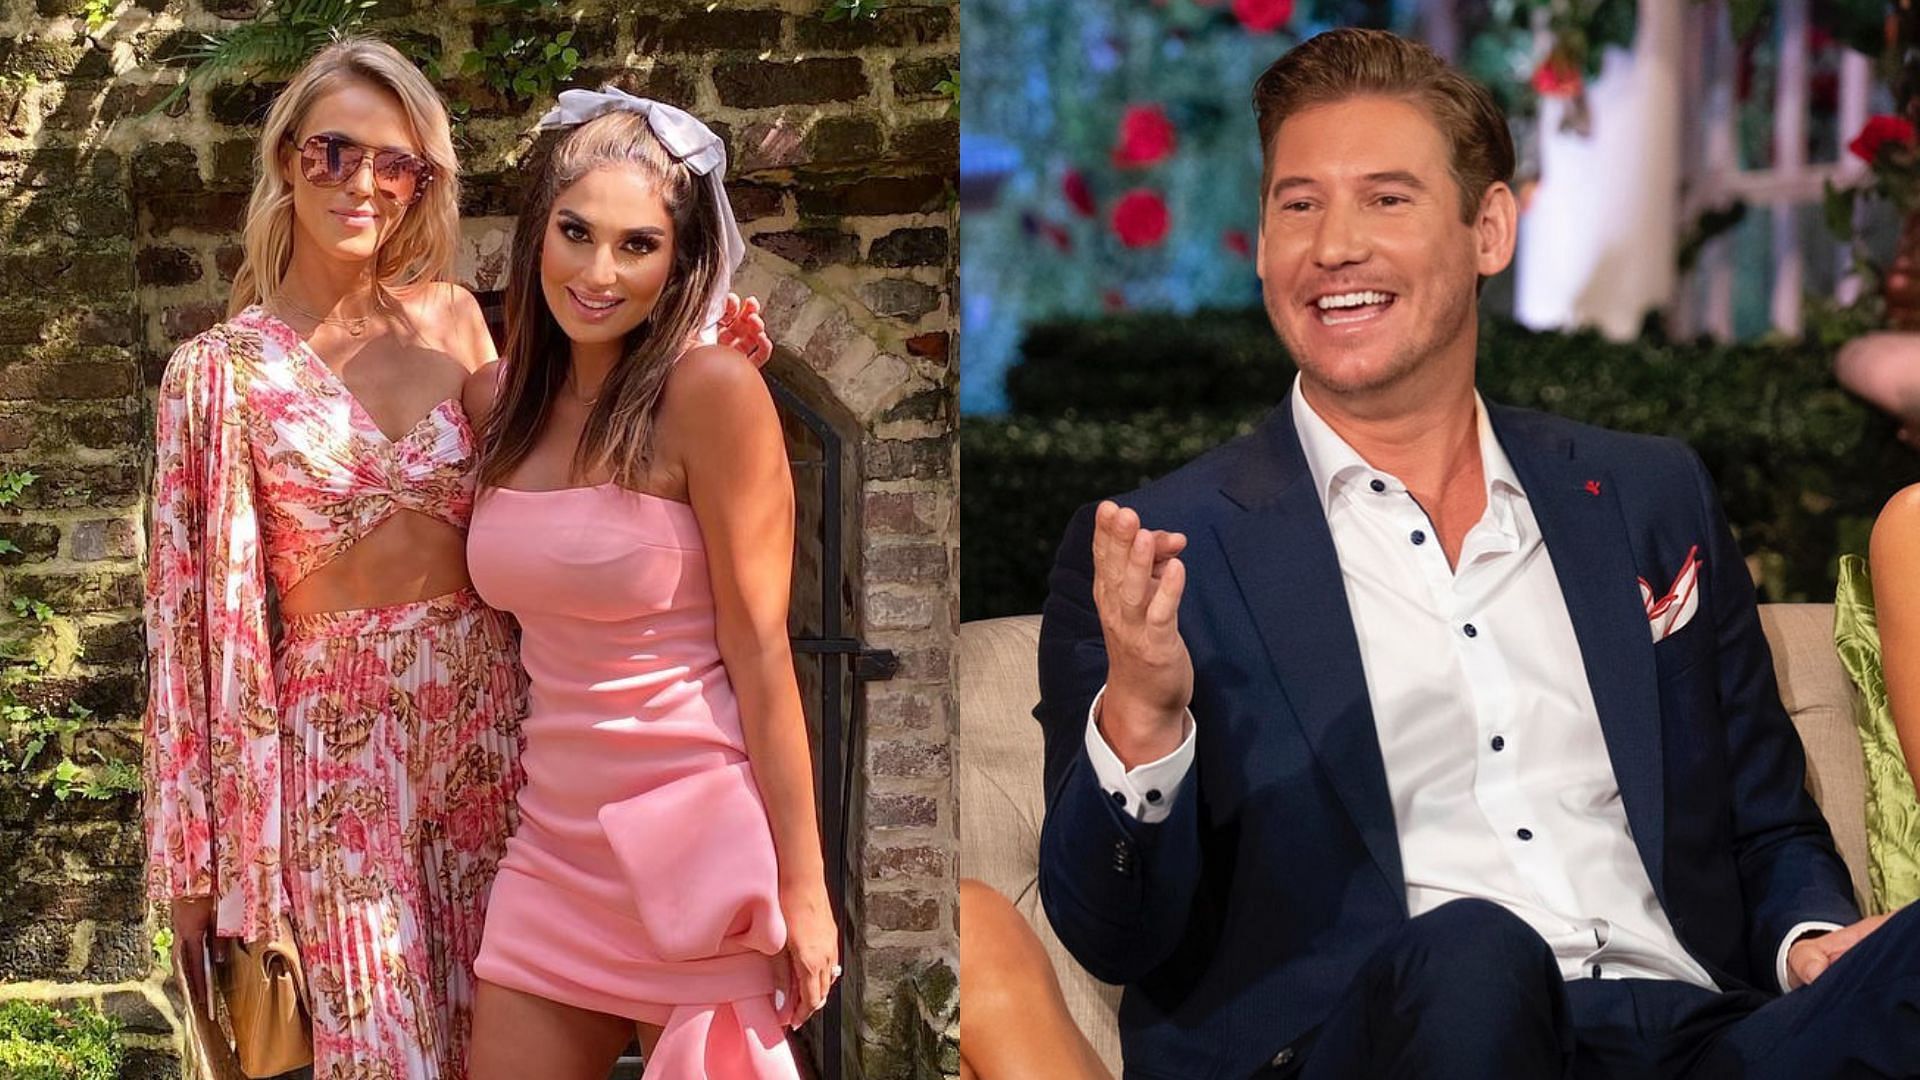 Olivia Flowers with Leva Bonaparte [left] and Austen Kroll [right] from Southern Charm